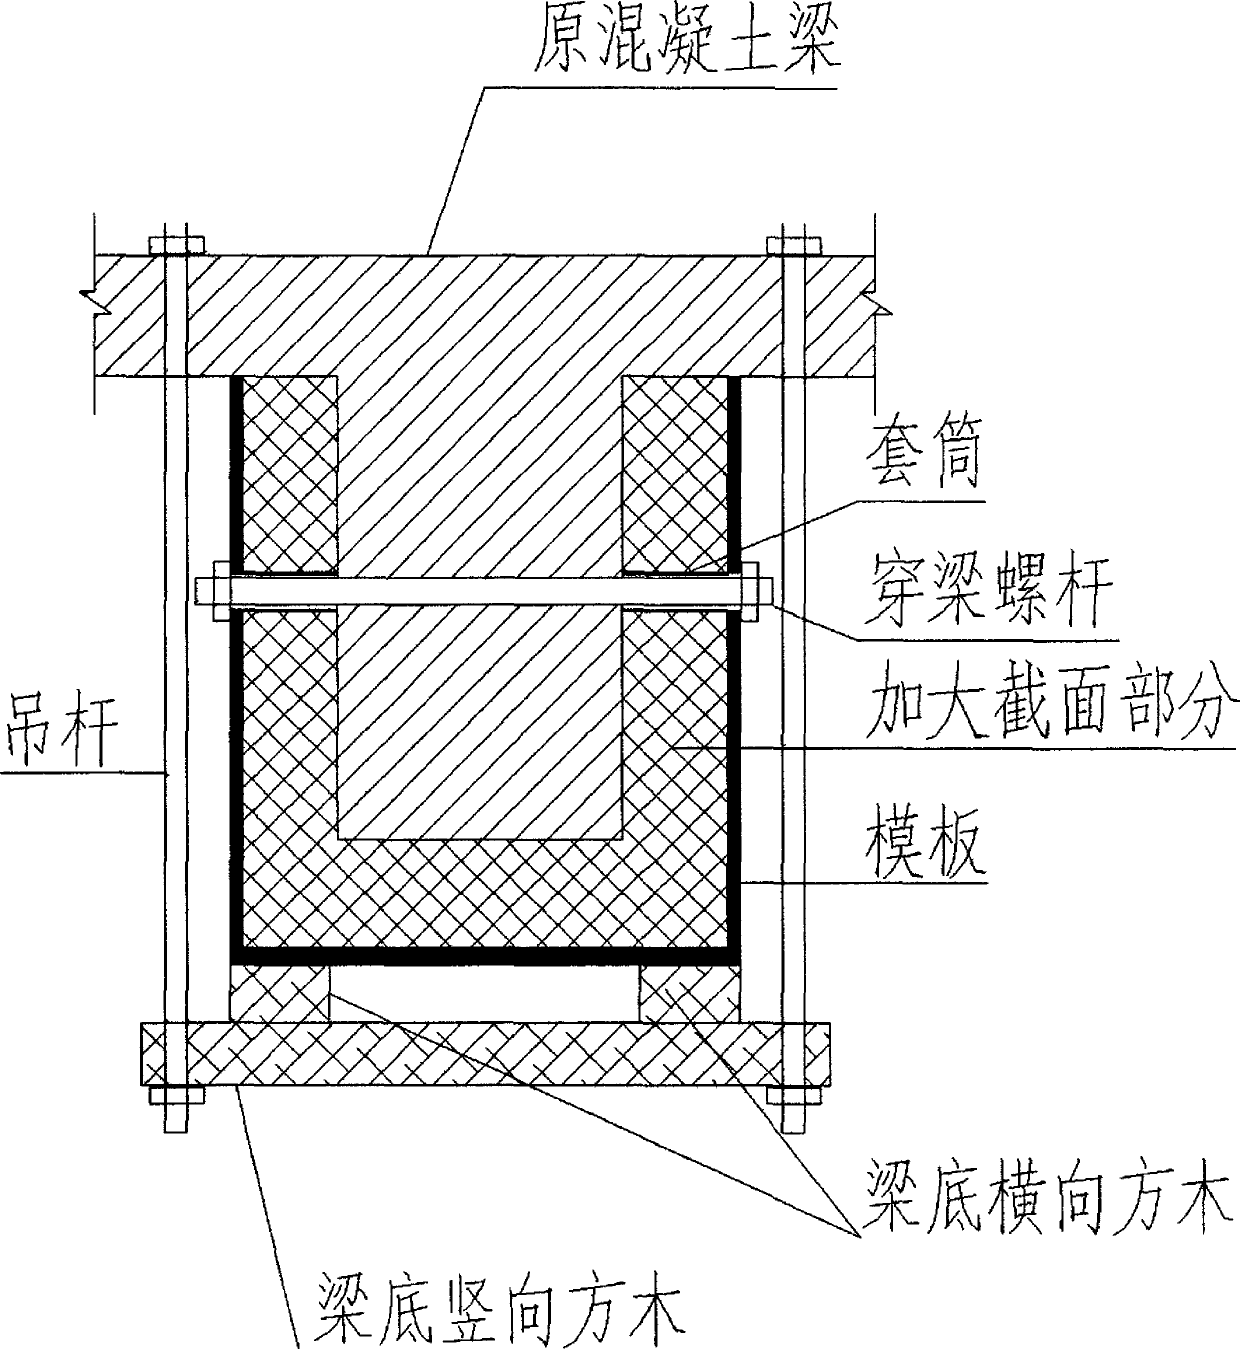 Suspension mold for enlarging and reinforcing concrete beam and construction method of suspension mold